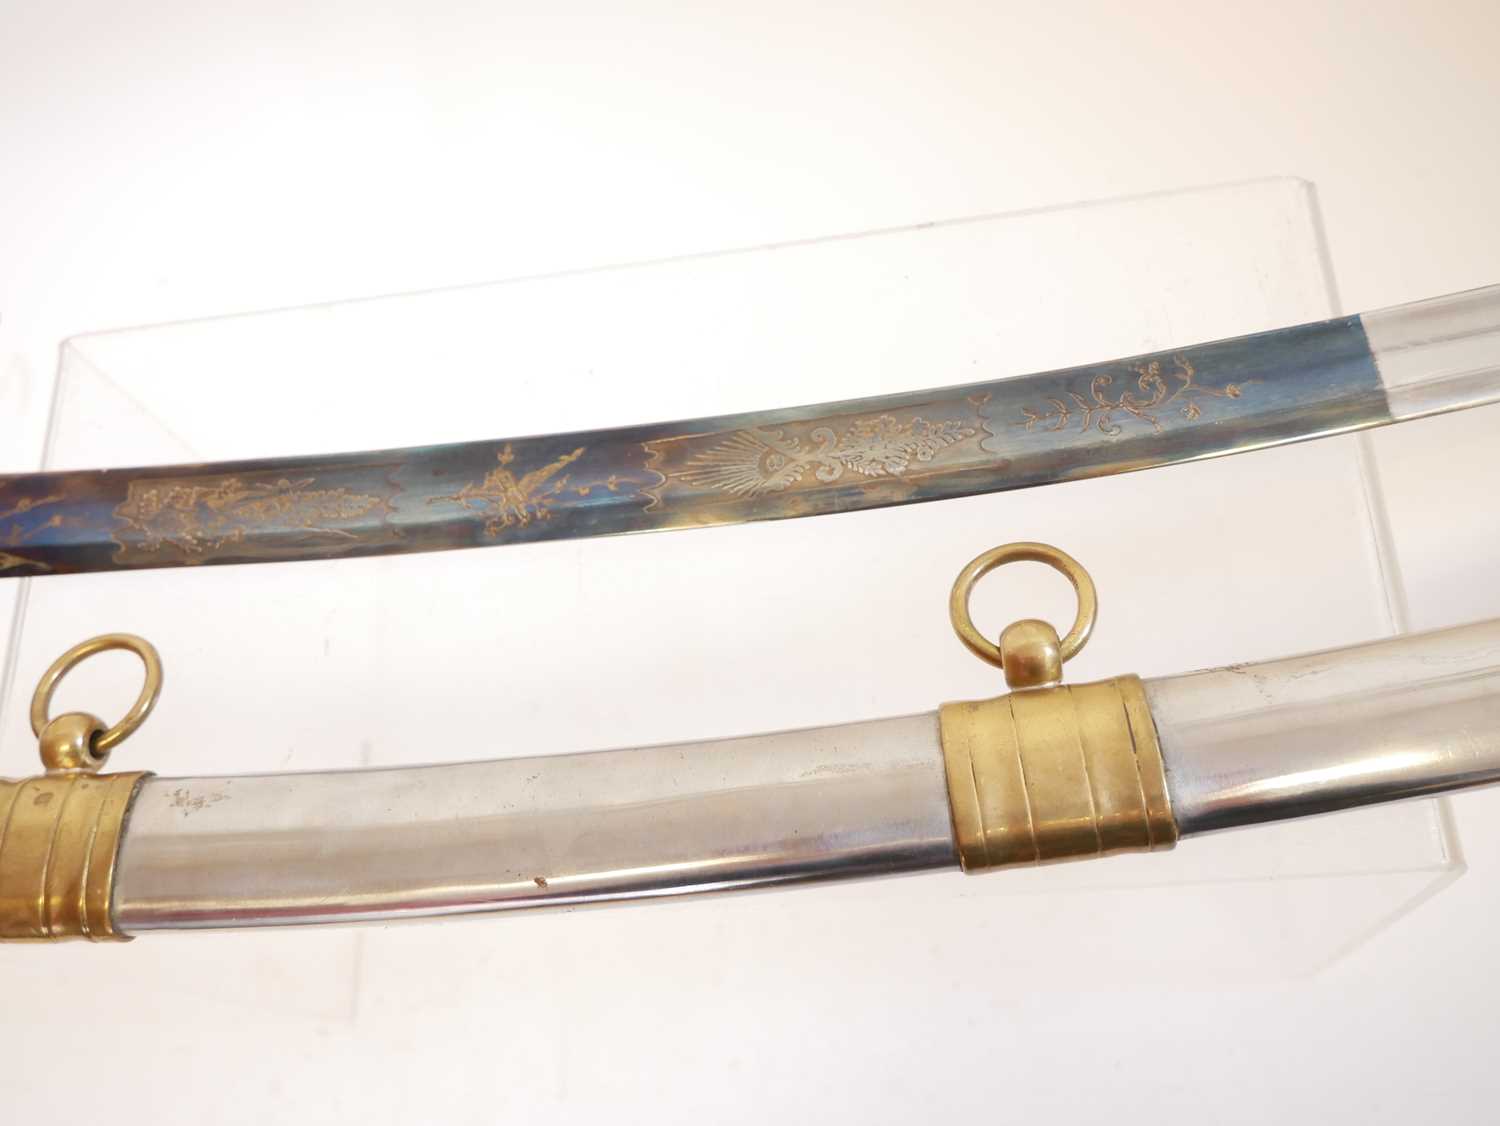 Reproduction copy of a French Cavalry sabre, with blue and gilt etched blade. Buyer must be over the - Image 4 of 7